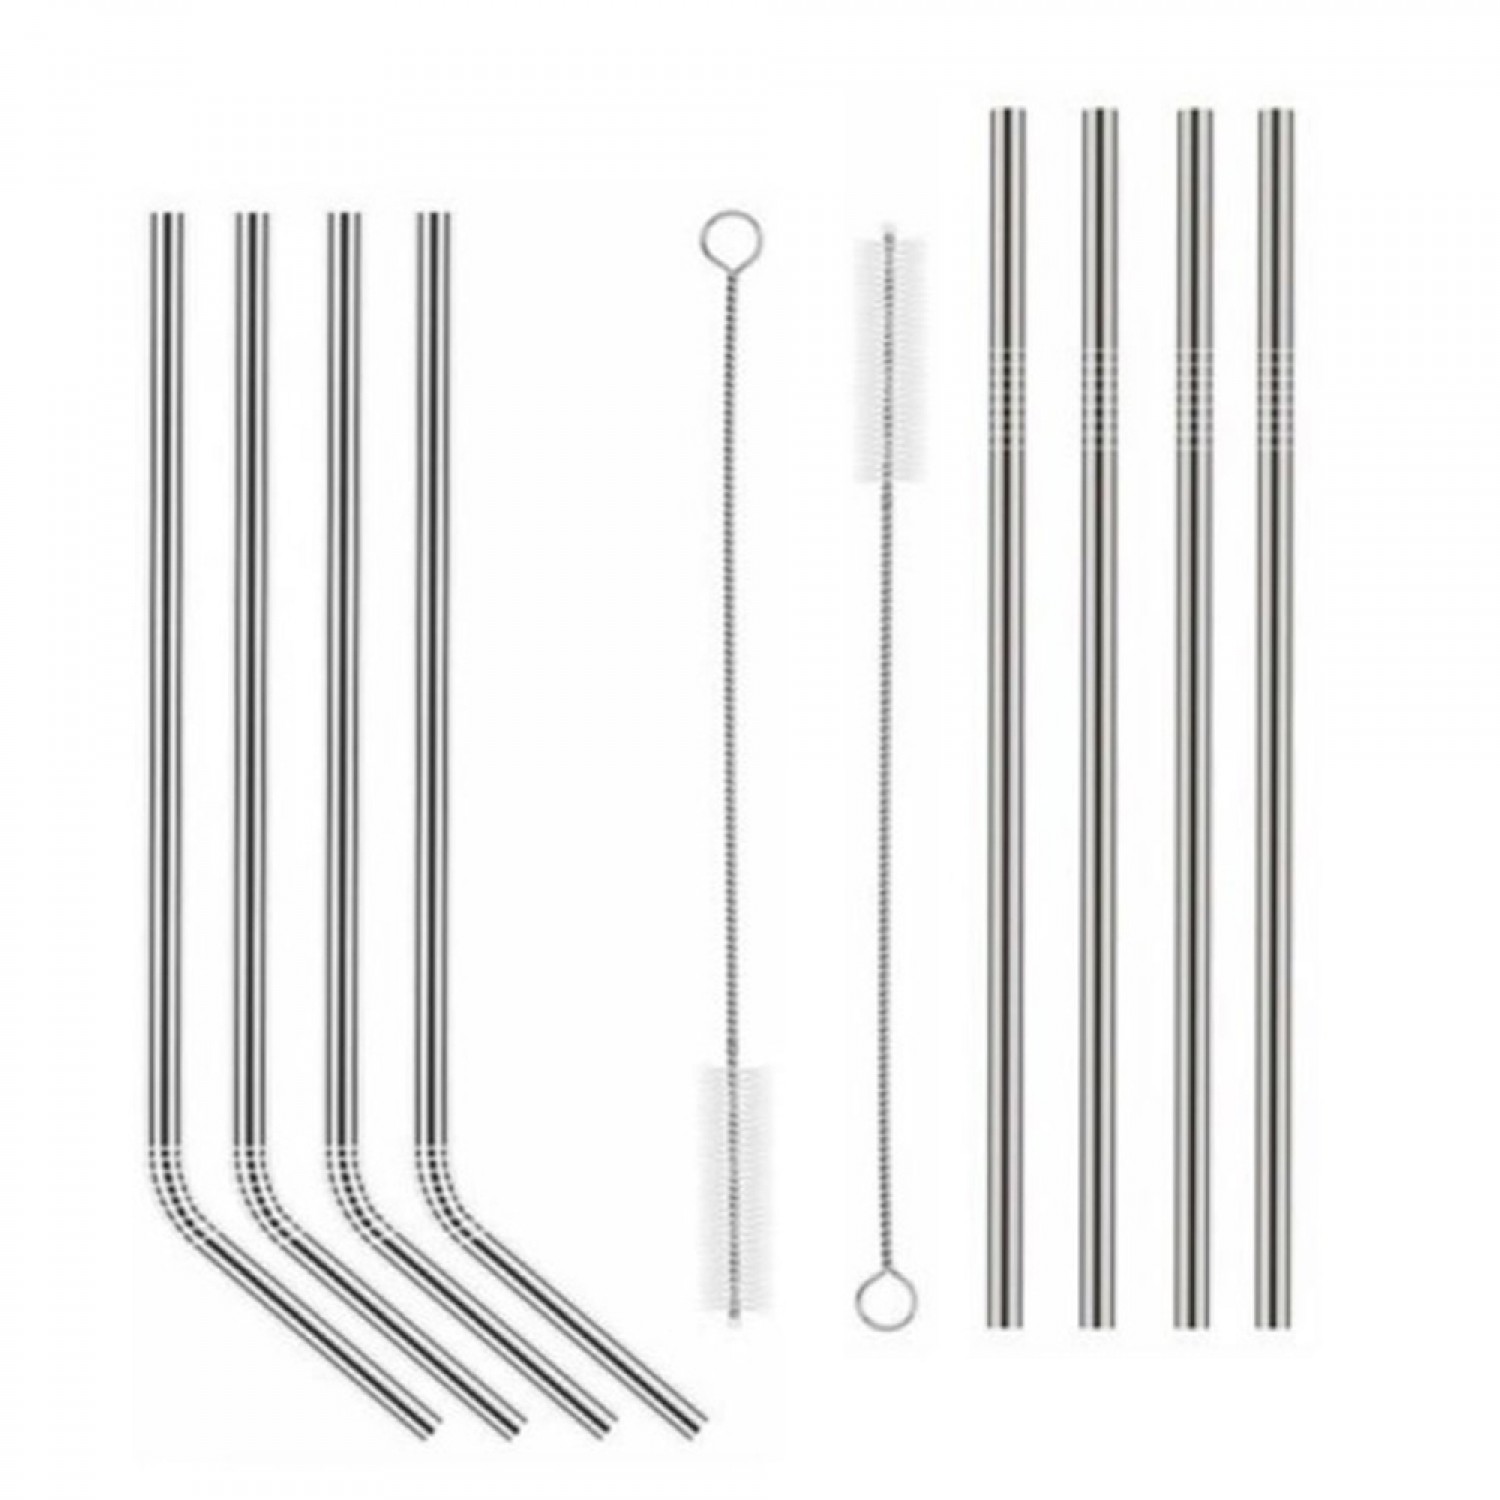 4 x Stainless Steel Drinking Straws incl. Cleaning Brush | Dora‘s